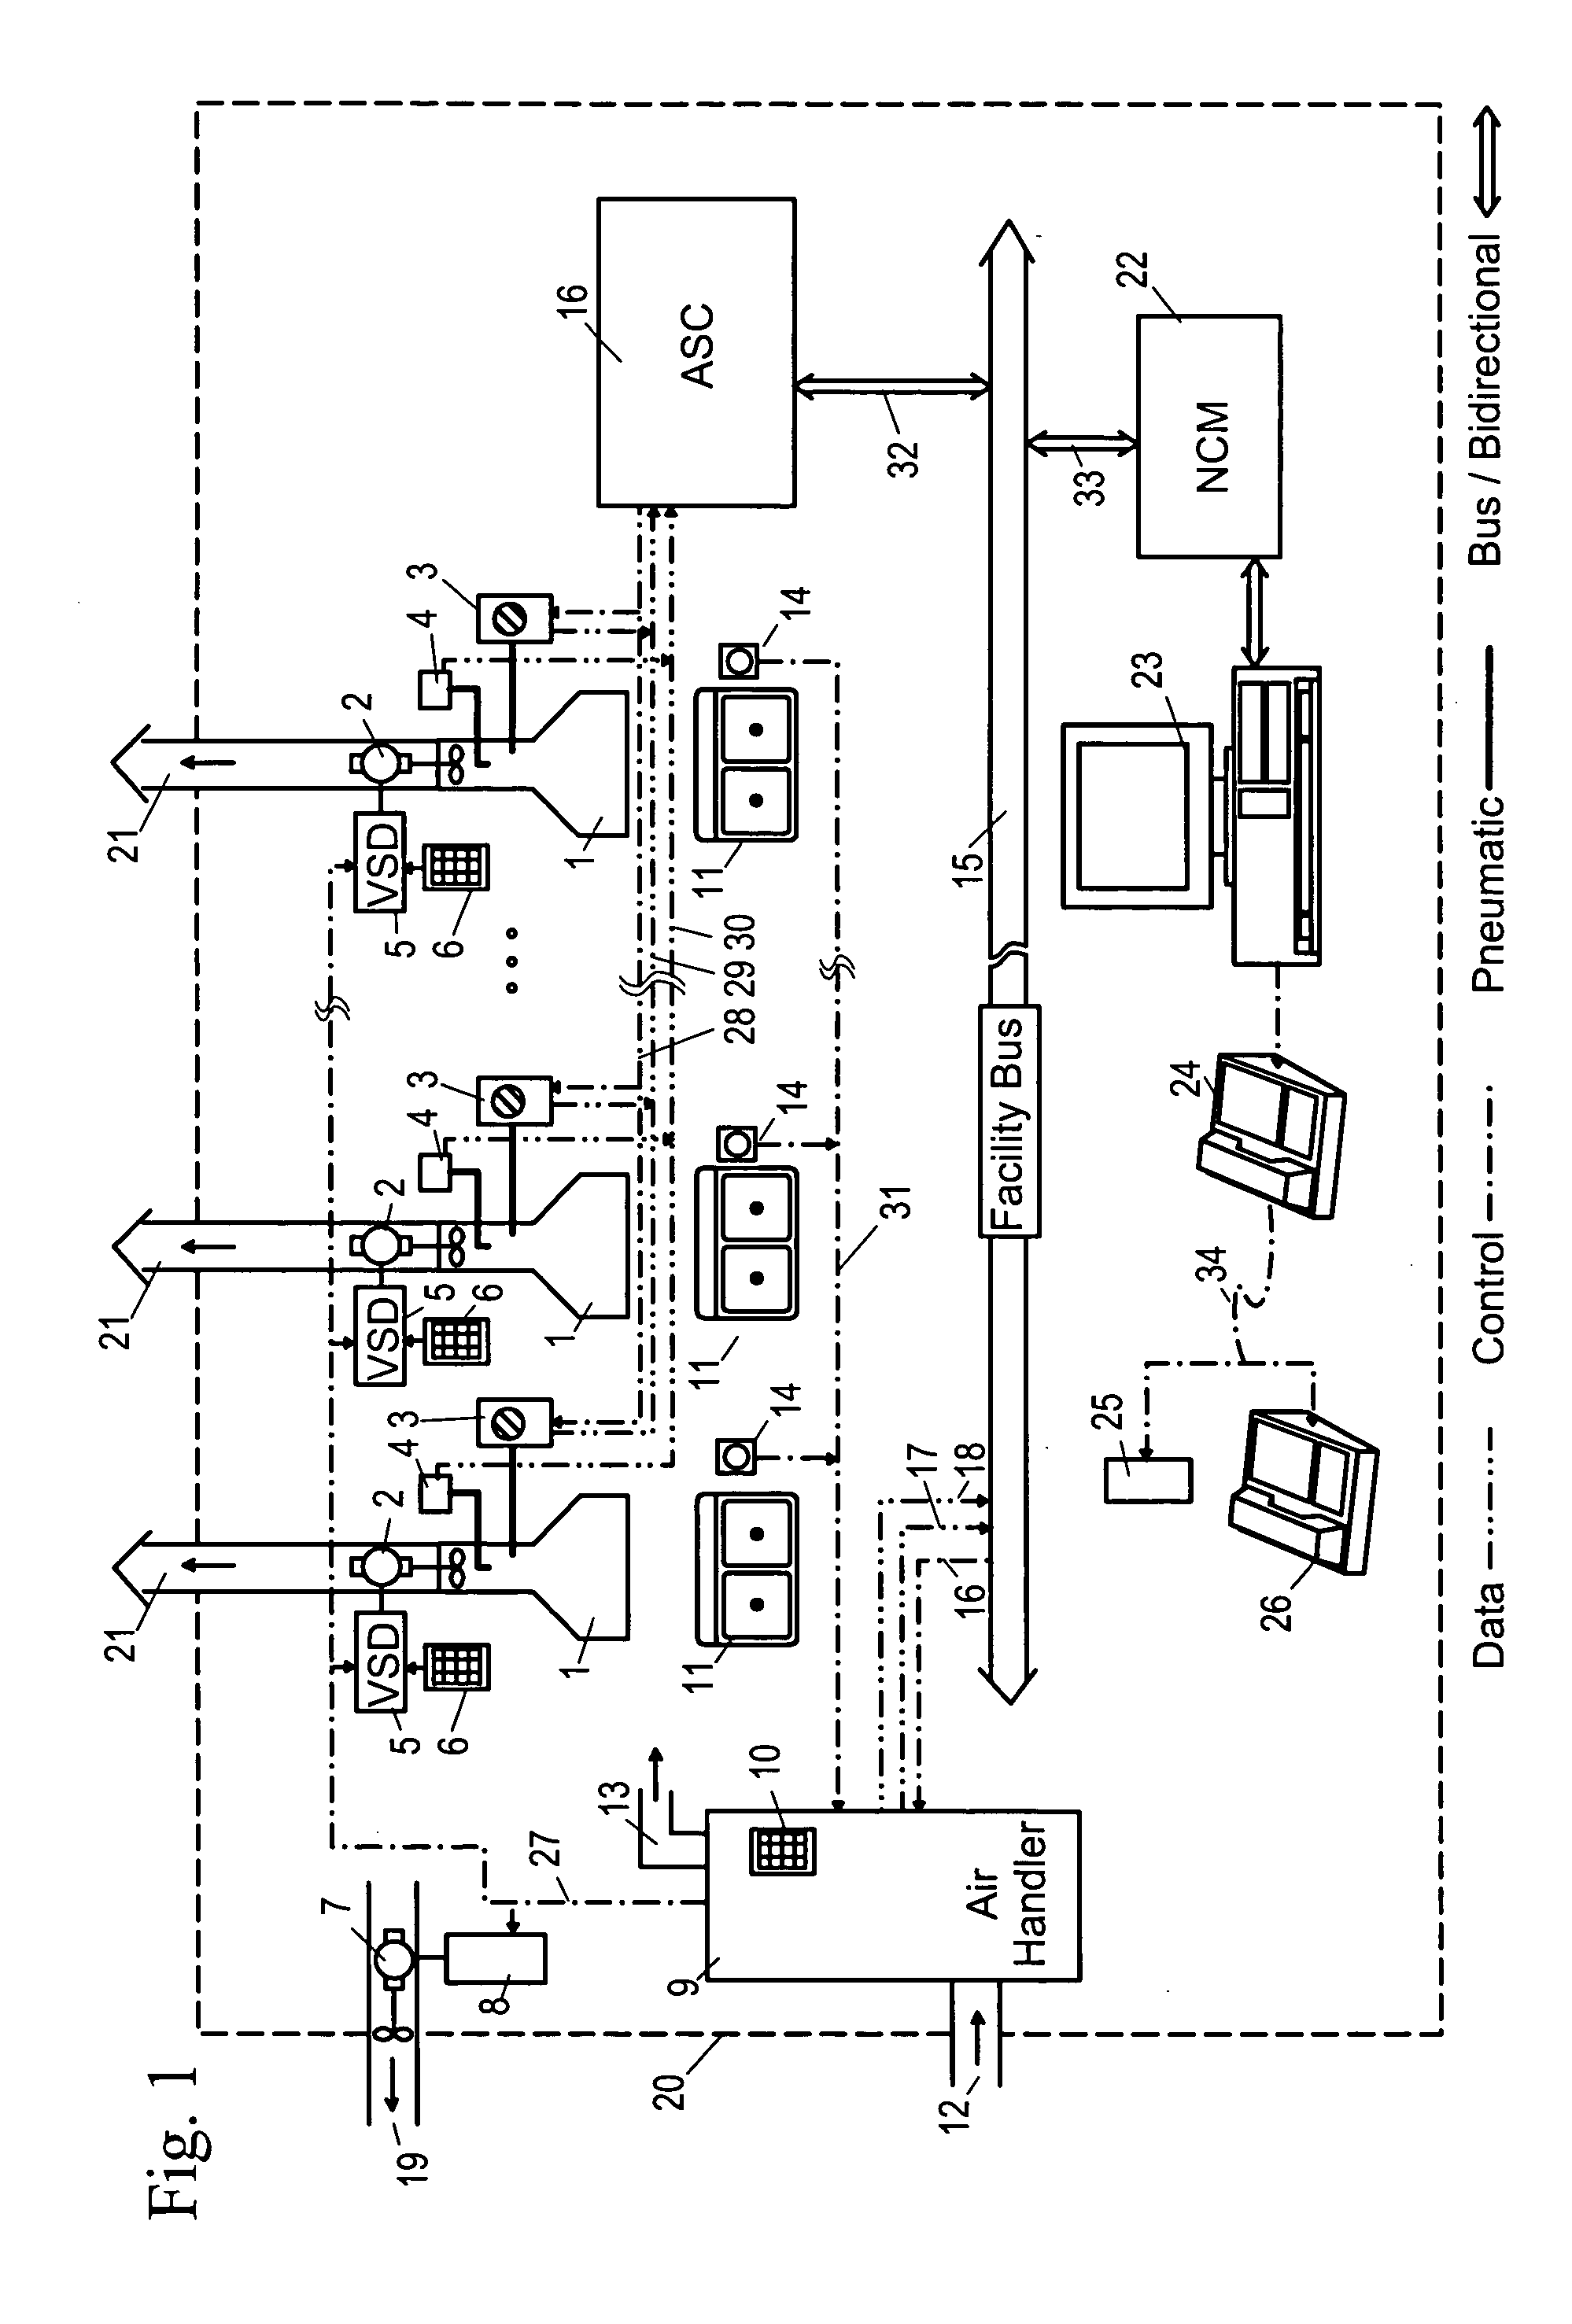 Air flow monitoring and control system with reduced false alarms